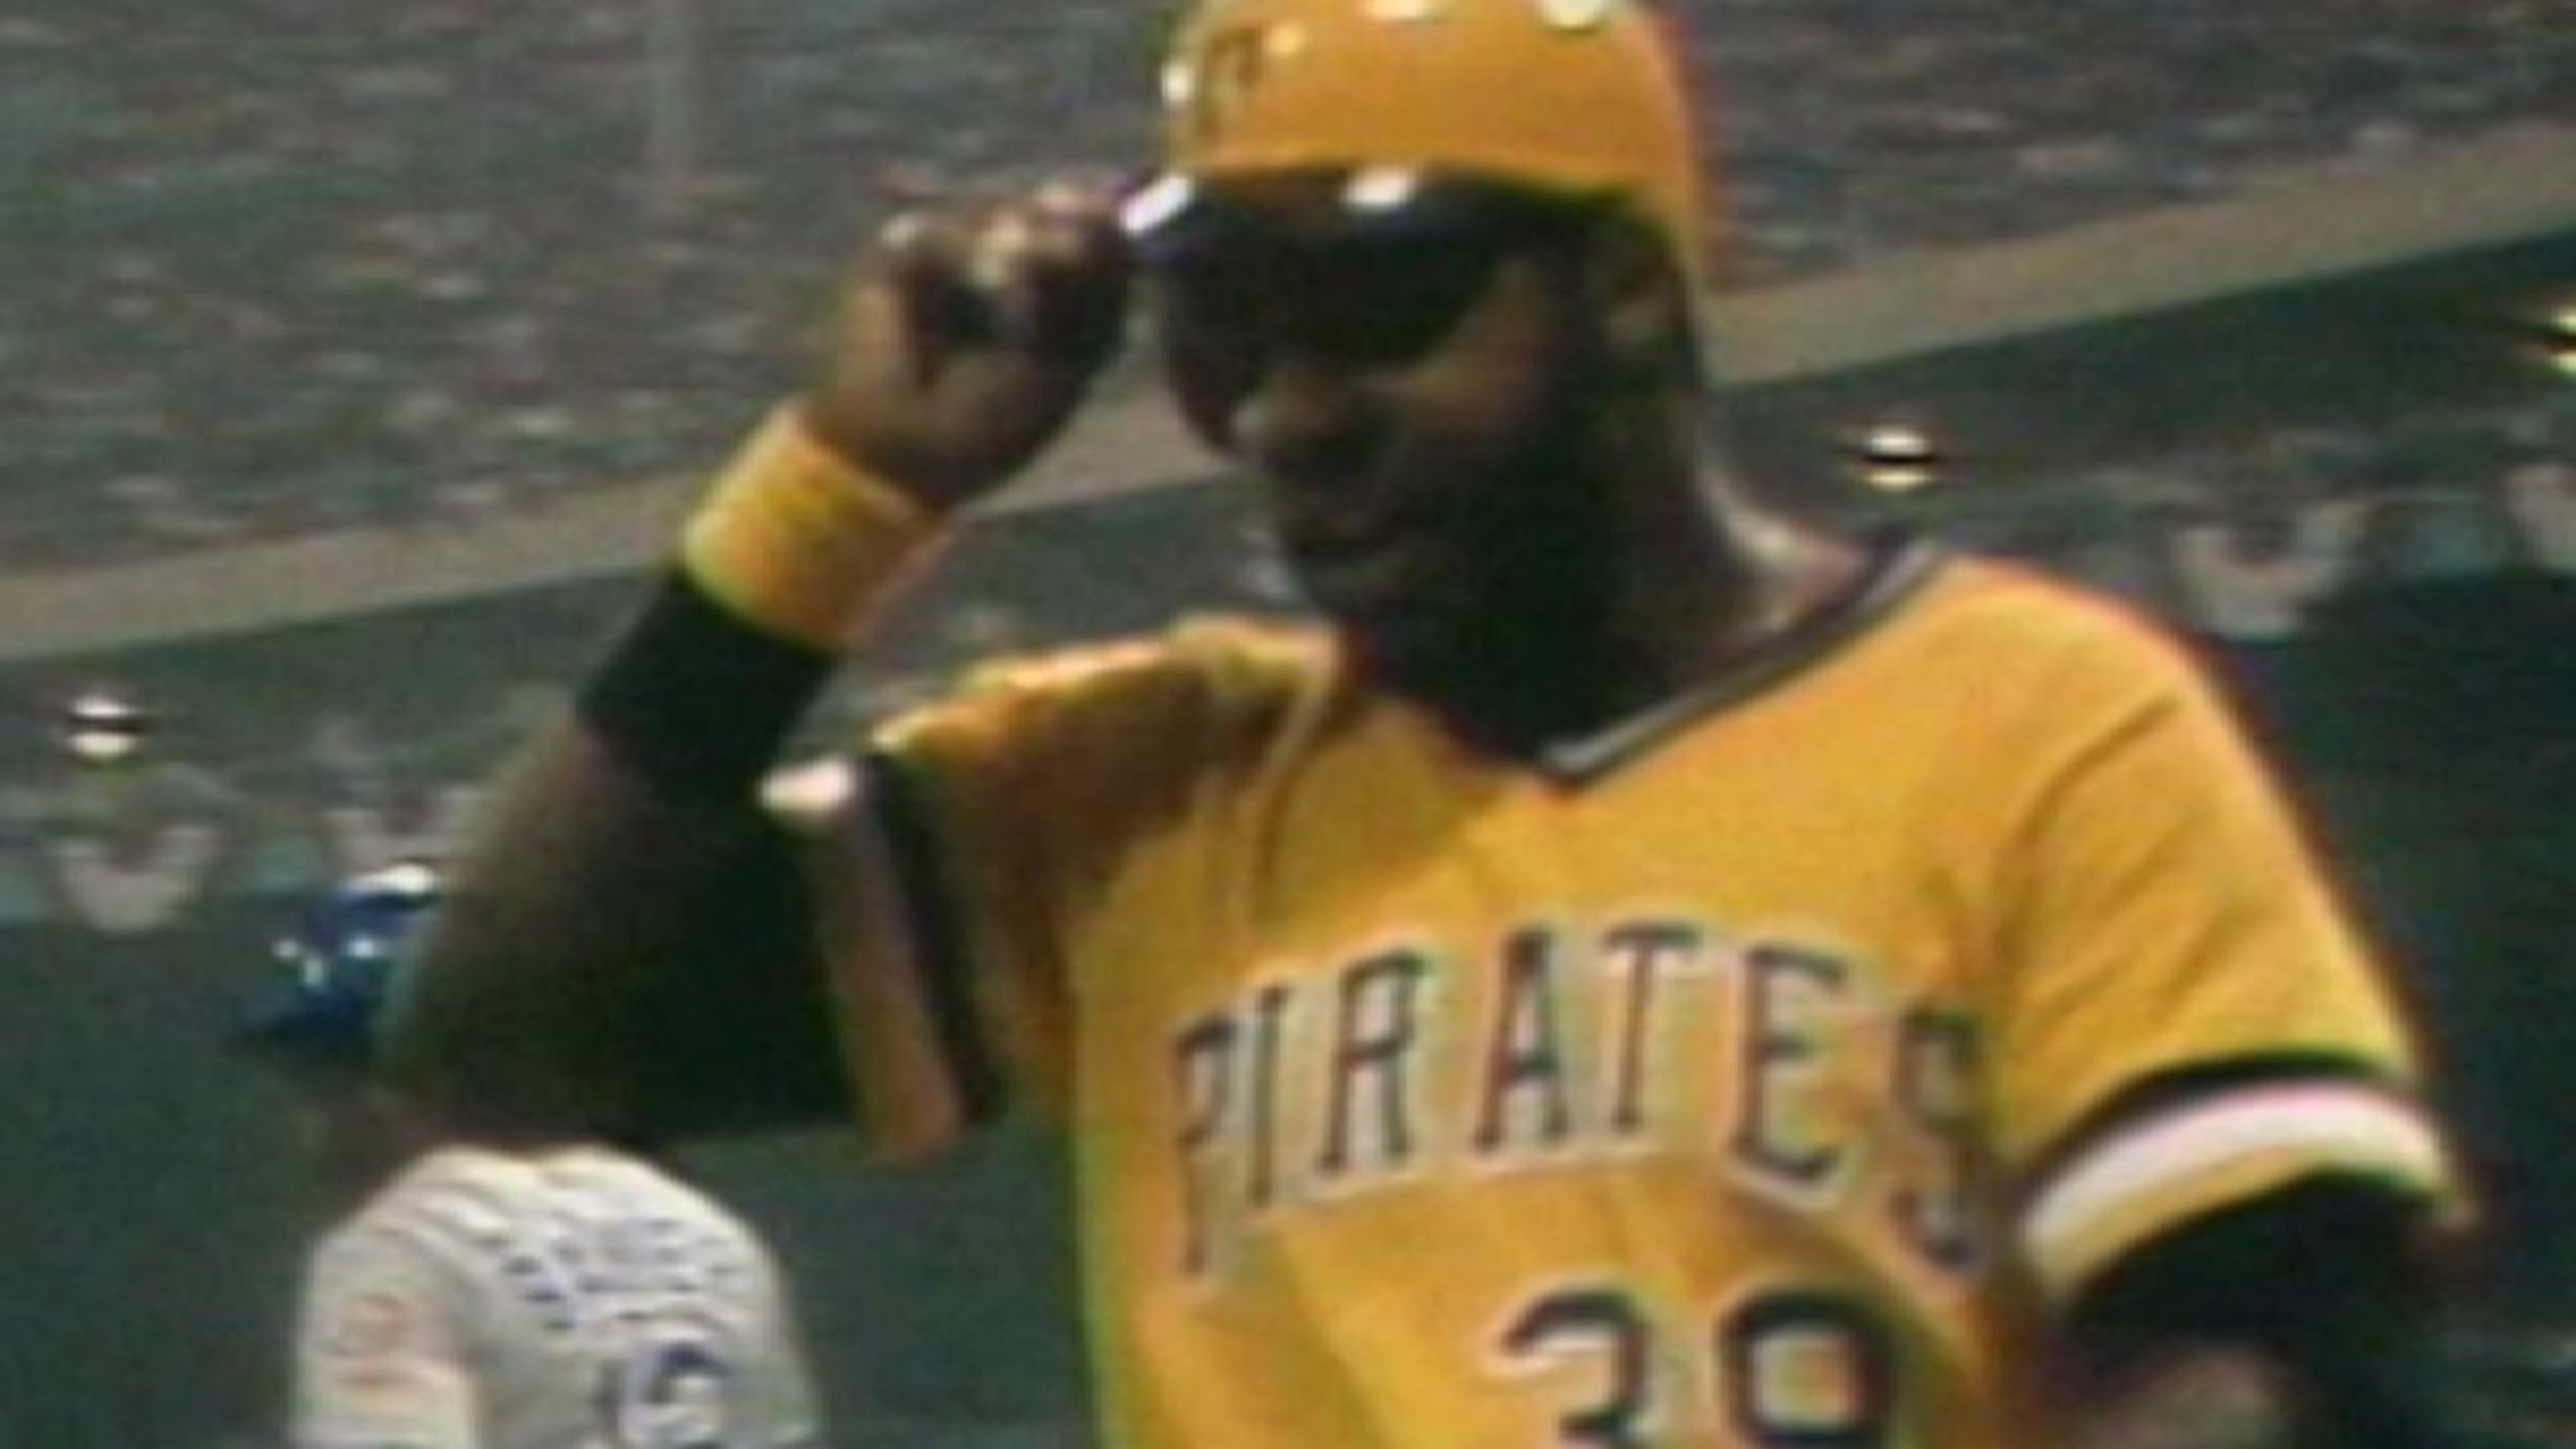 Cincinnati Reds Dave Parker joins hands with Pittsburgh area